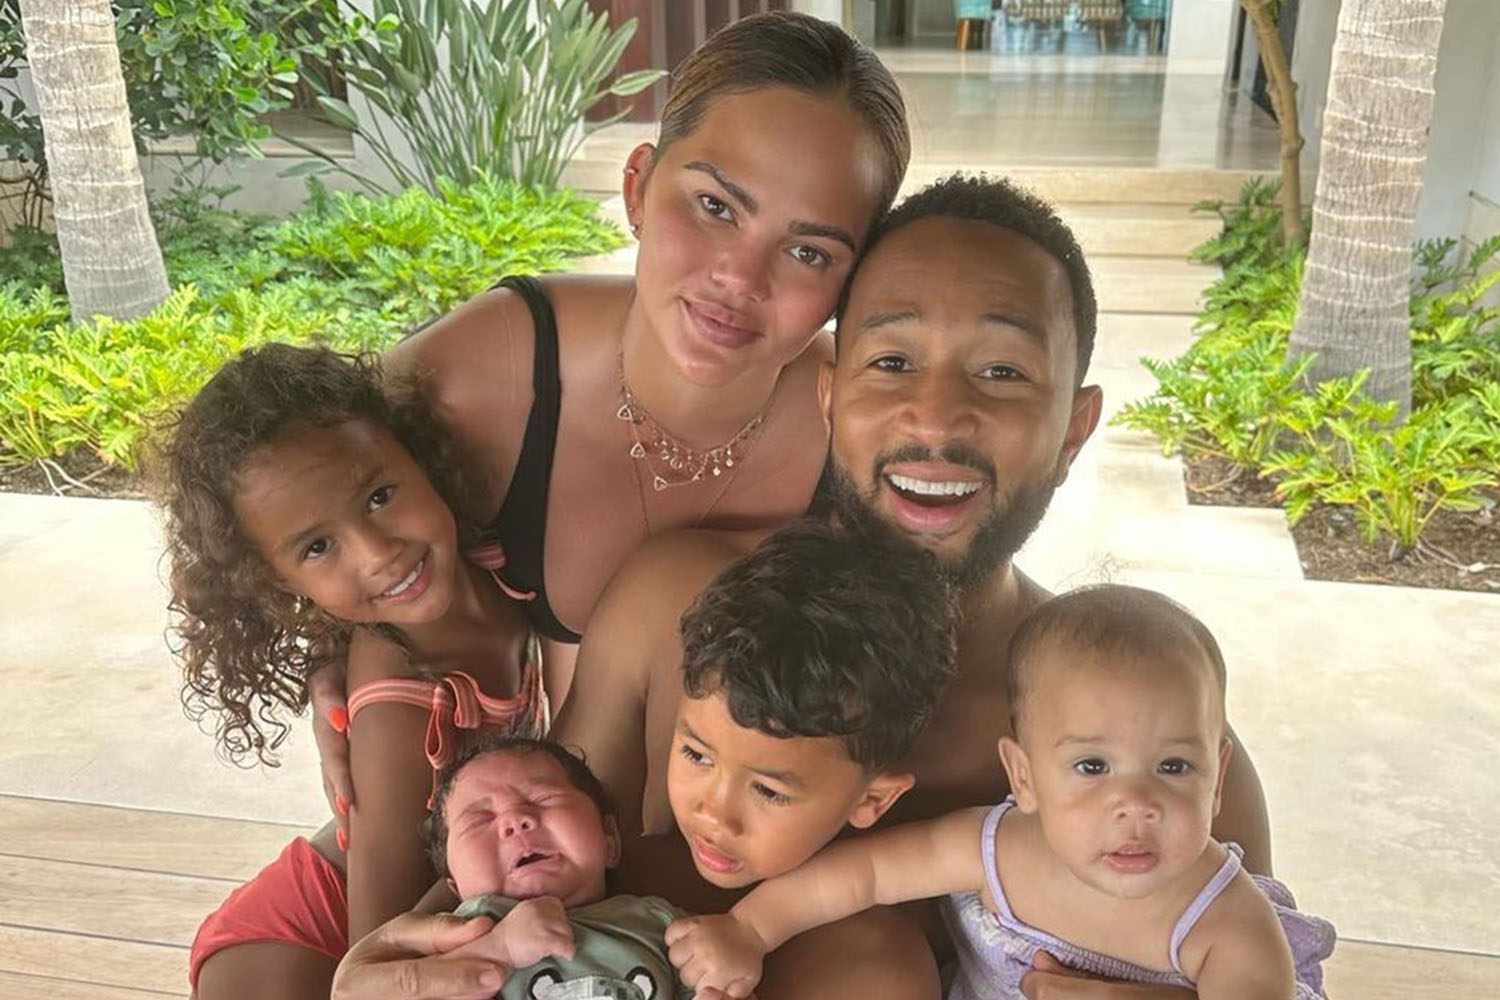 John Legend Celebrates His 'Queen' Chrissy Teigen on Mother's Day: 'Heart and Soul of Our Home'